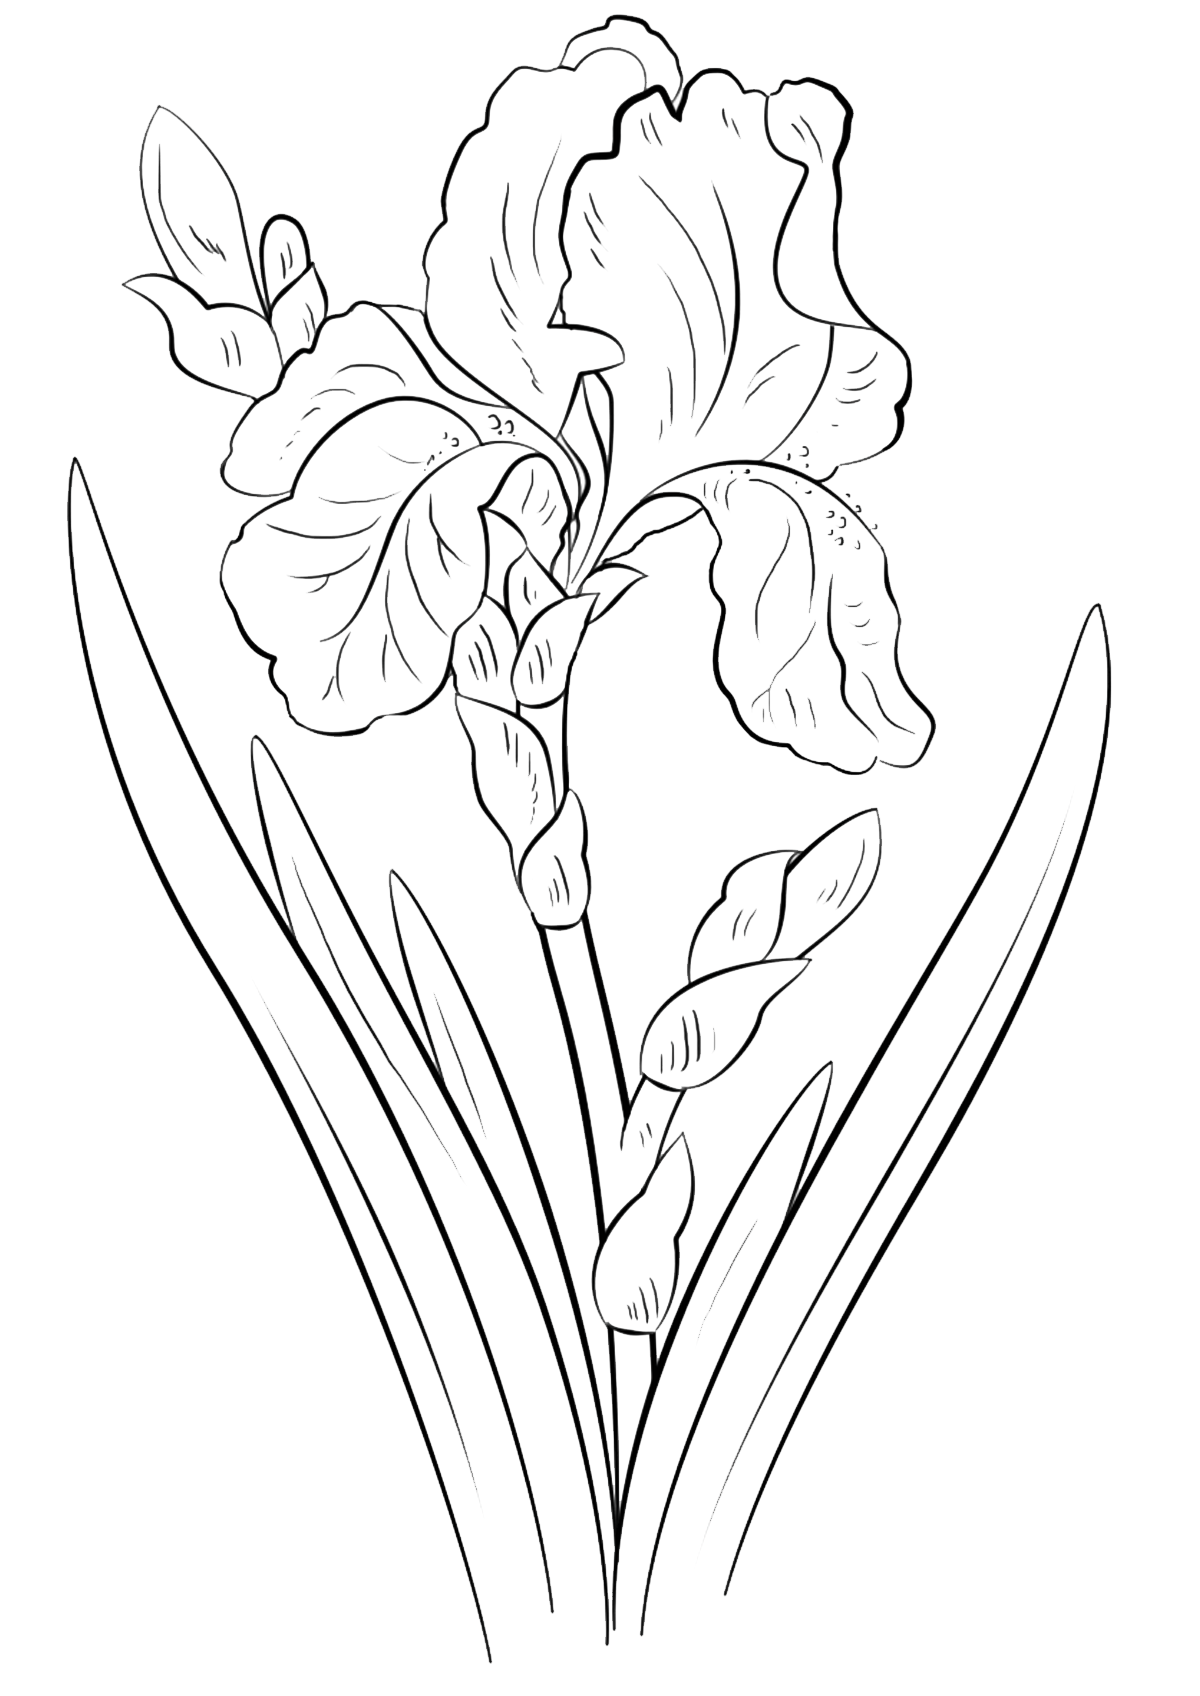 Iris coloring pages to download and print for free